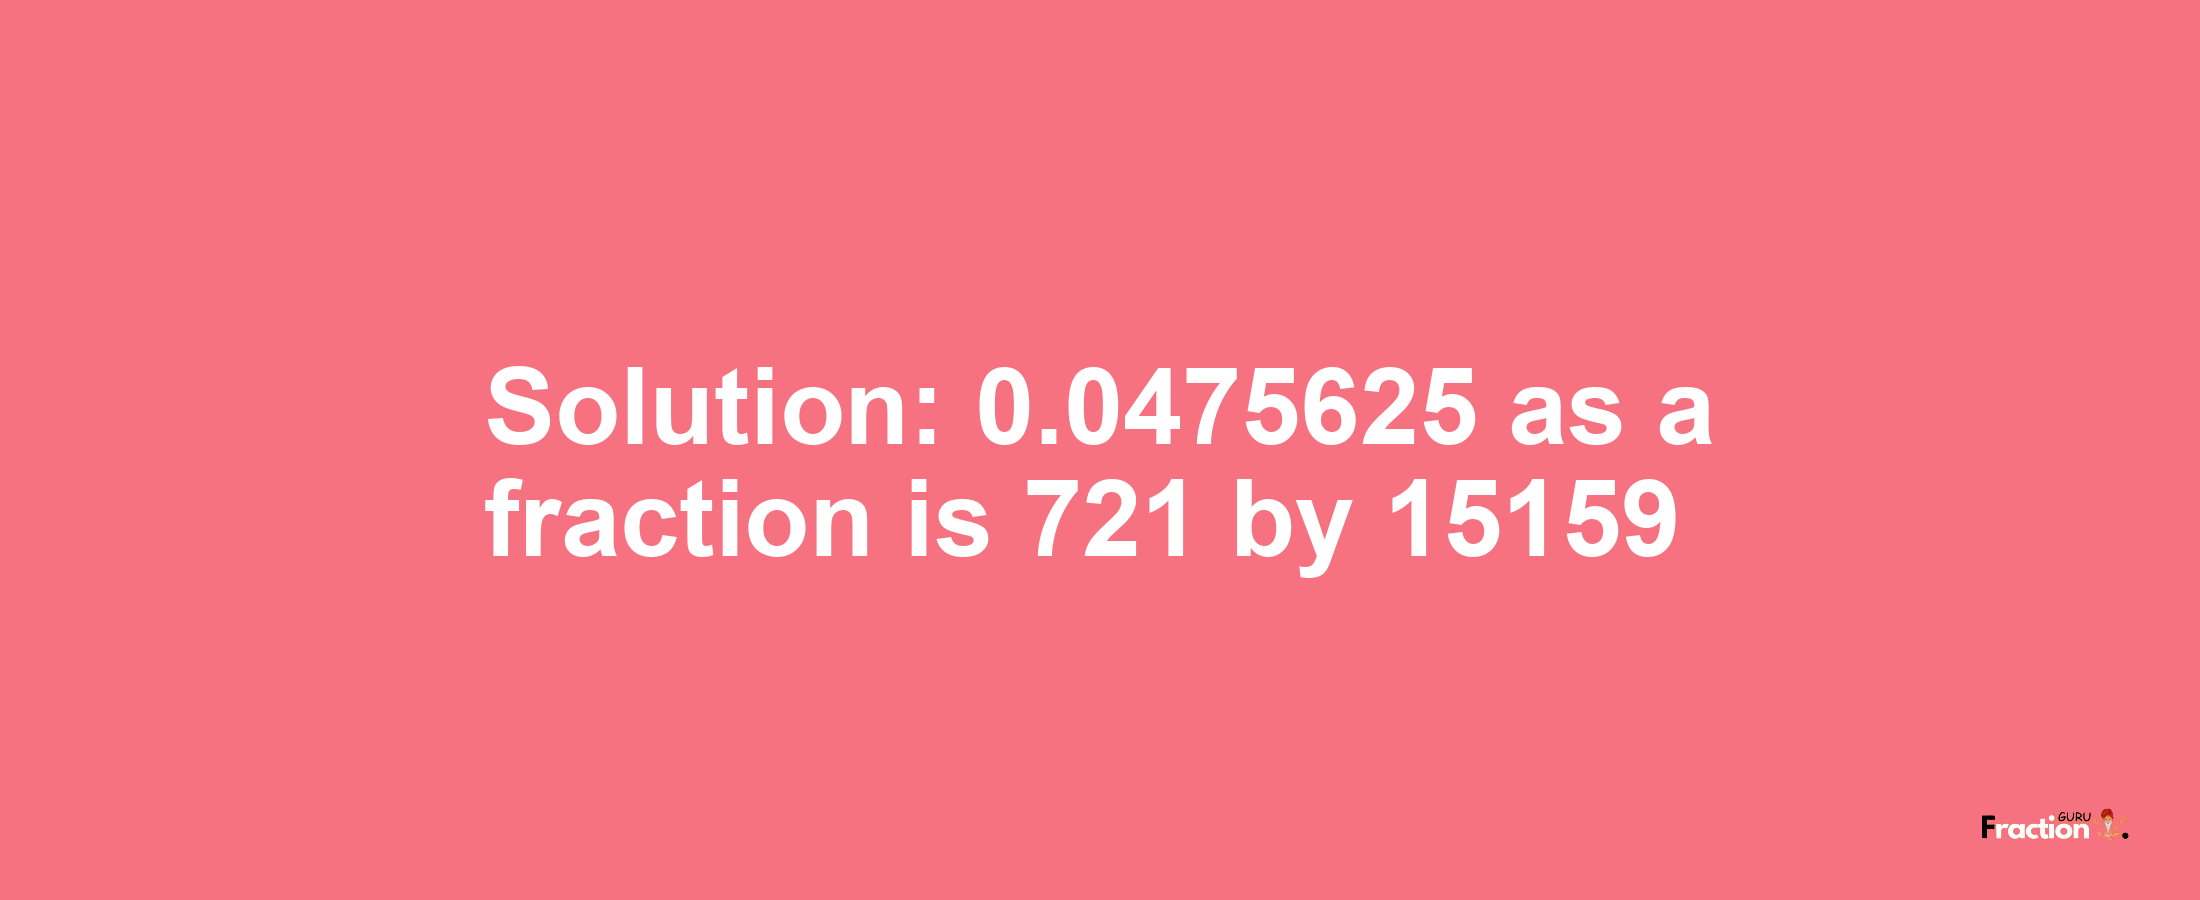 Solution:0.0475625 as a fraction is 721/15159